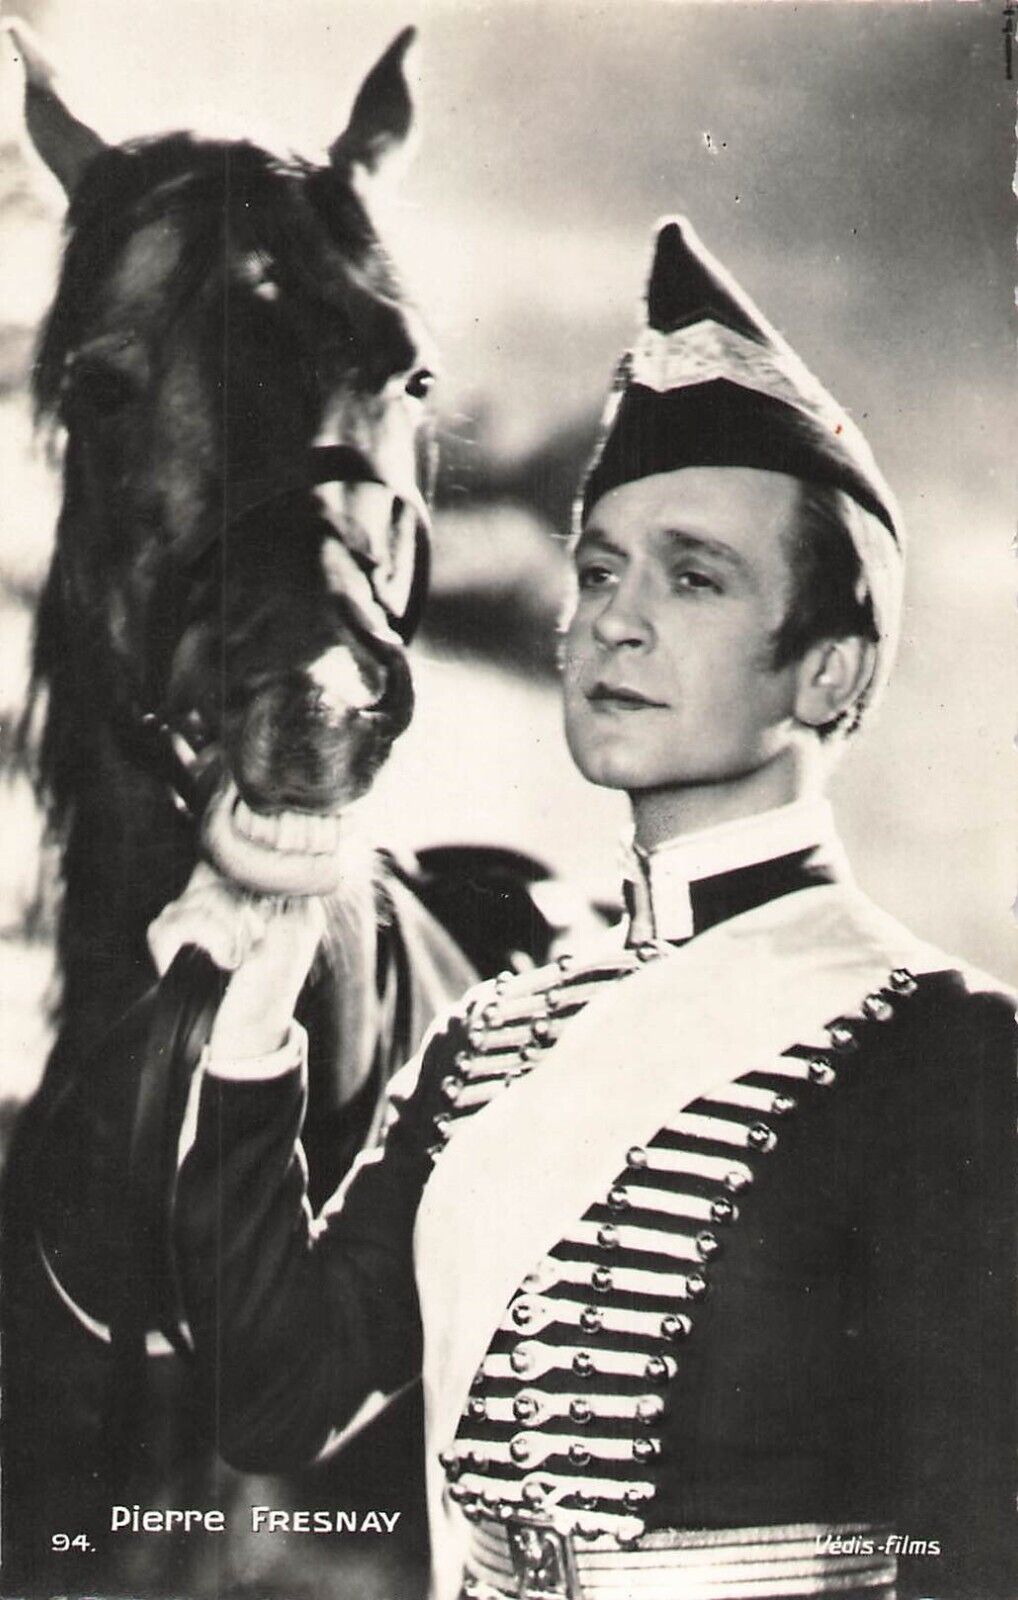 CP PIERRE FRESNAY - ACTOR IN HORSE COSTUME - 91135